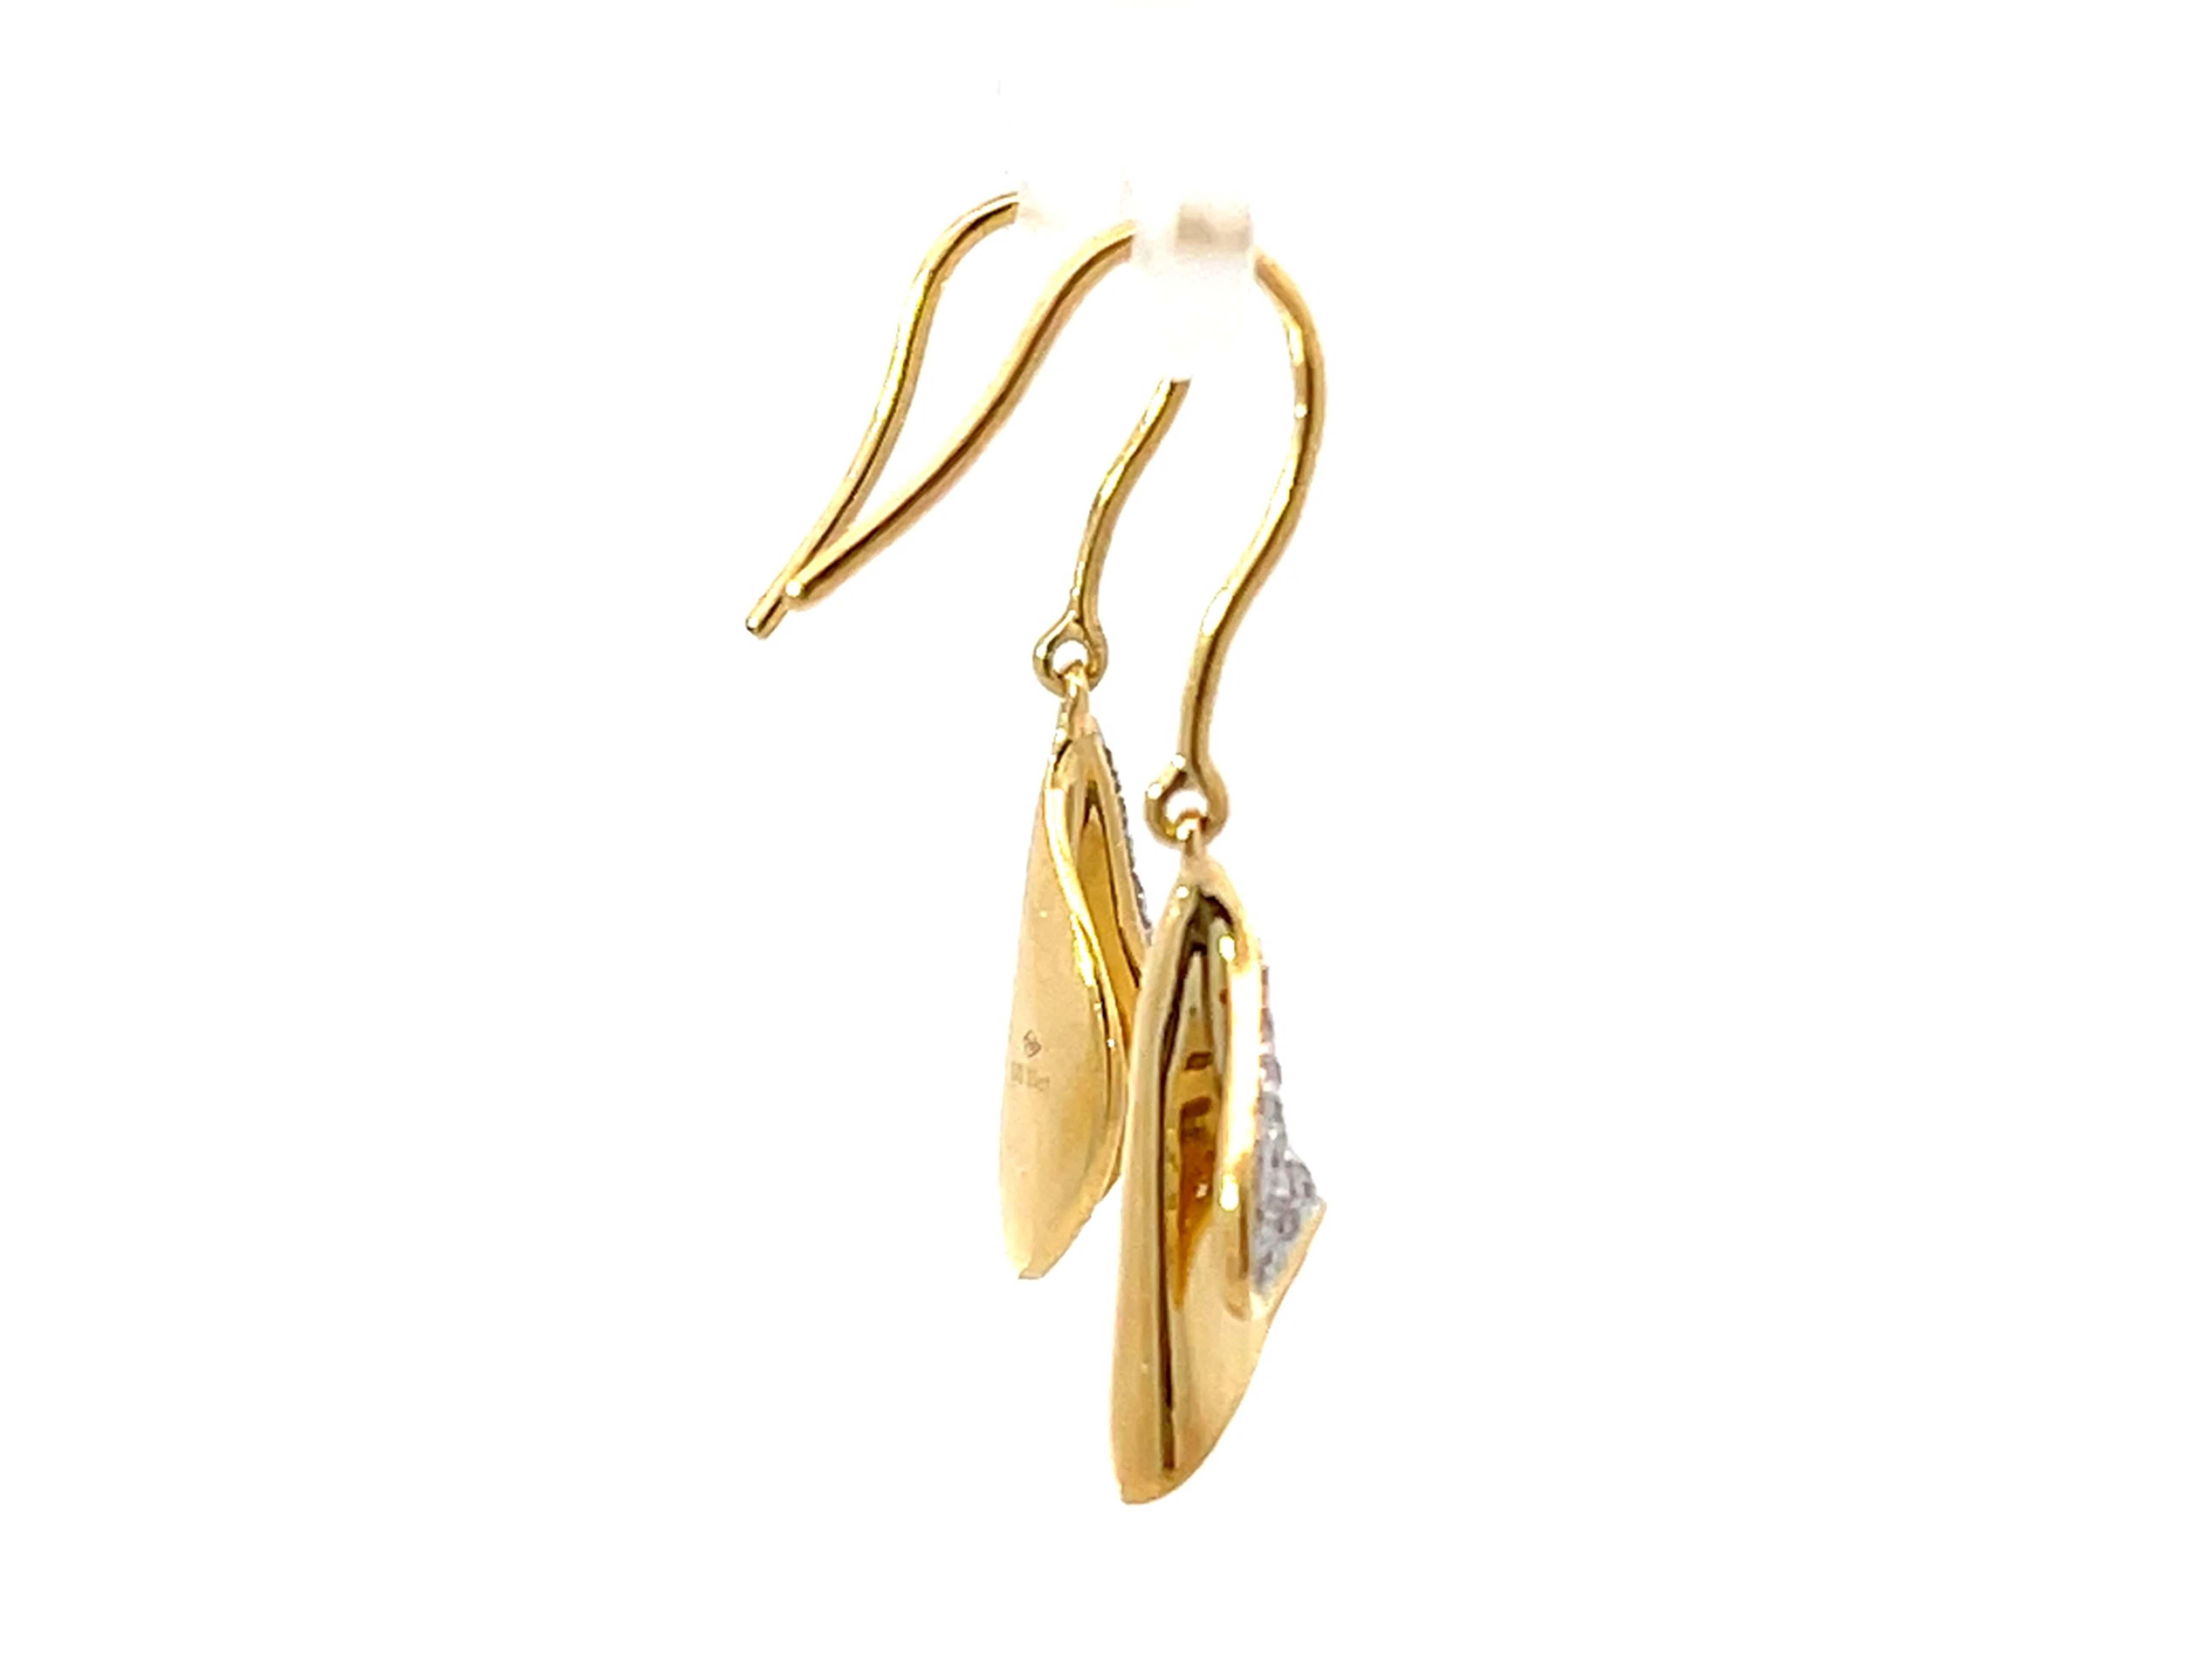 Dangly Gold Diamond Earrings 18K Yellow Gold In New Condition For Sale In Honolulu, HI